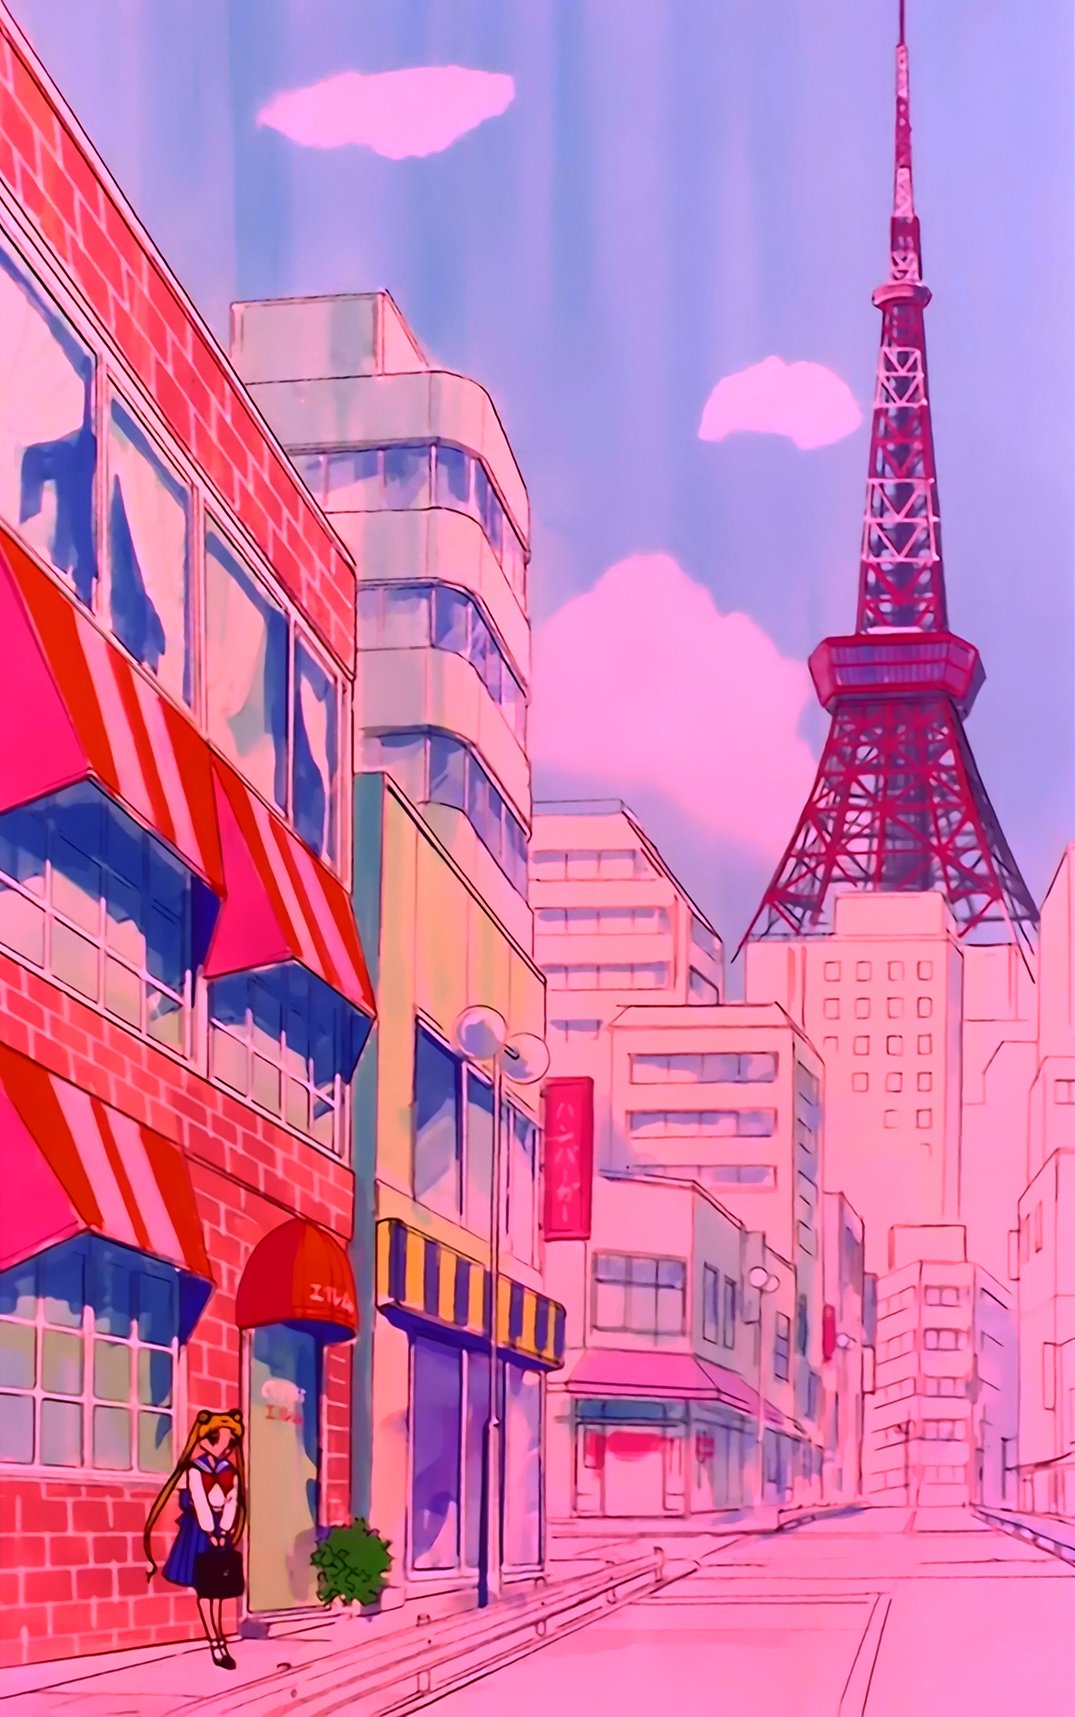 Image result for 90s anime aesthetic  Sailor moon background Sailor moon  aesthetic Anime scenery